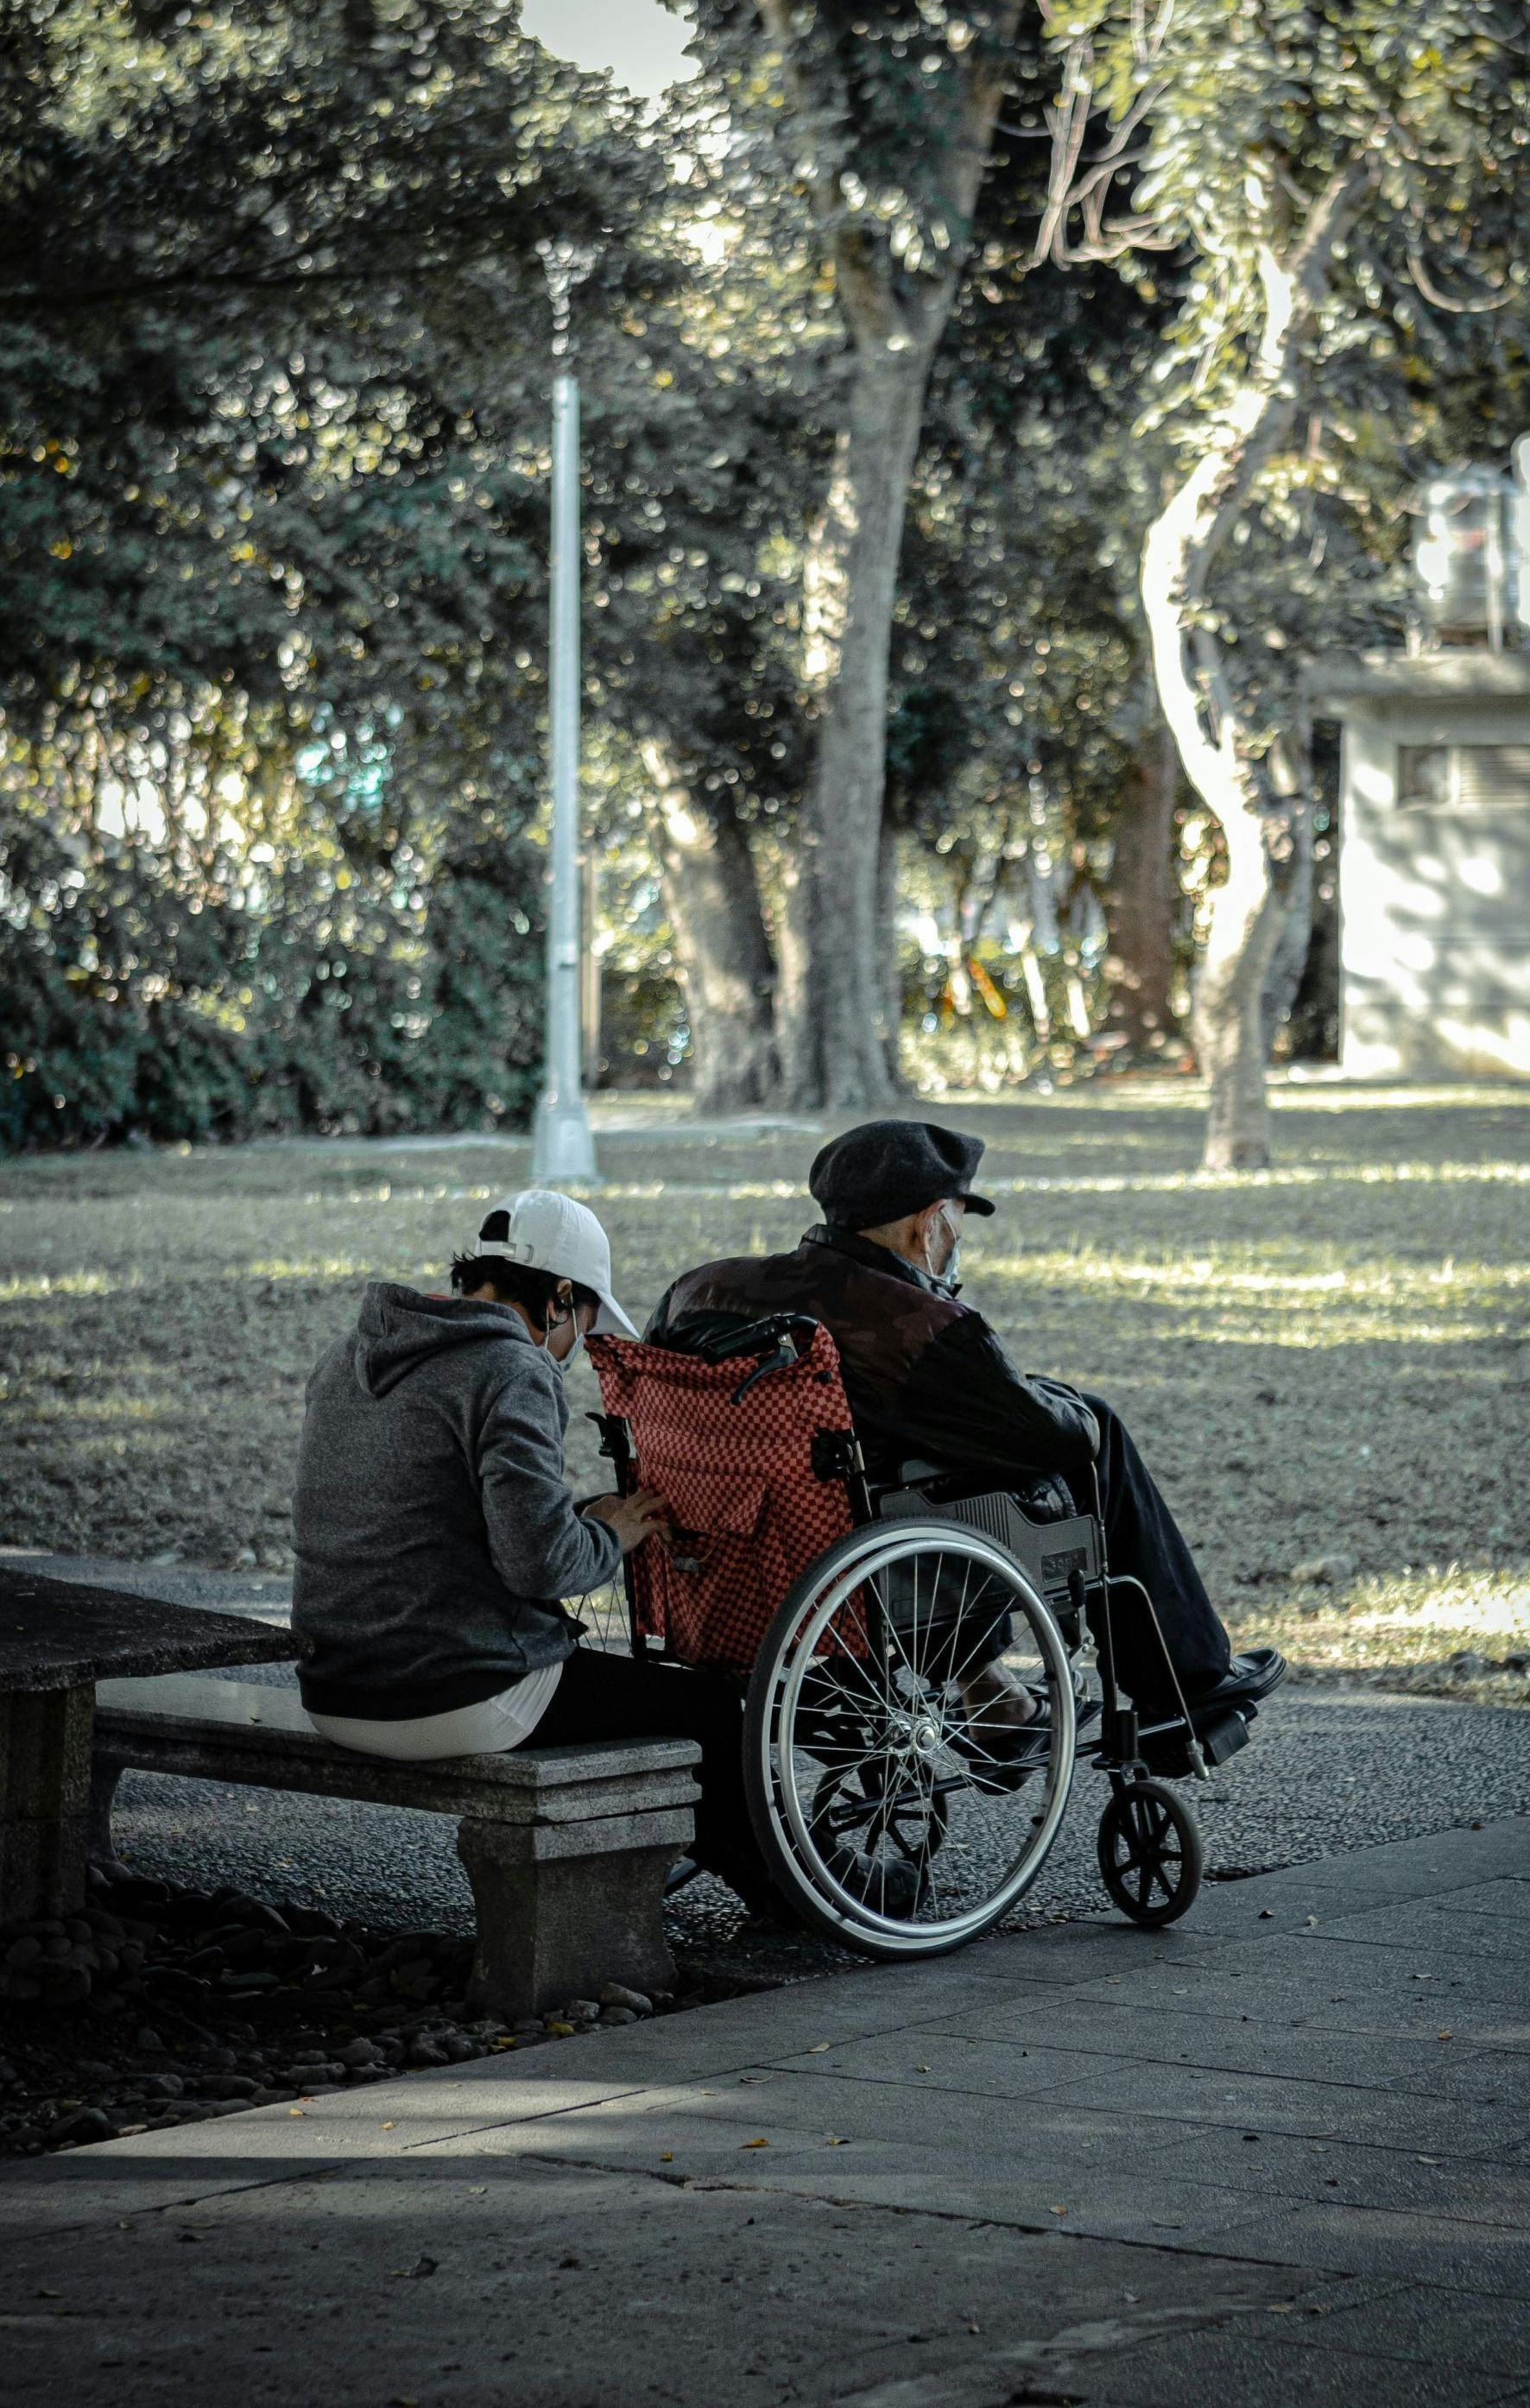 A woman is sitting on a bench next to a man in a wheelchair.